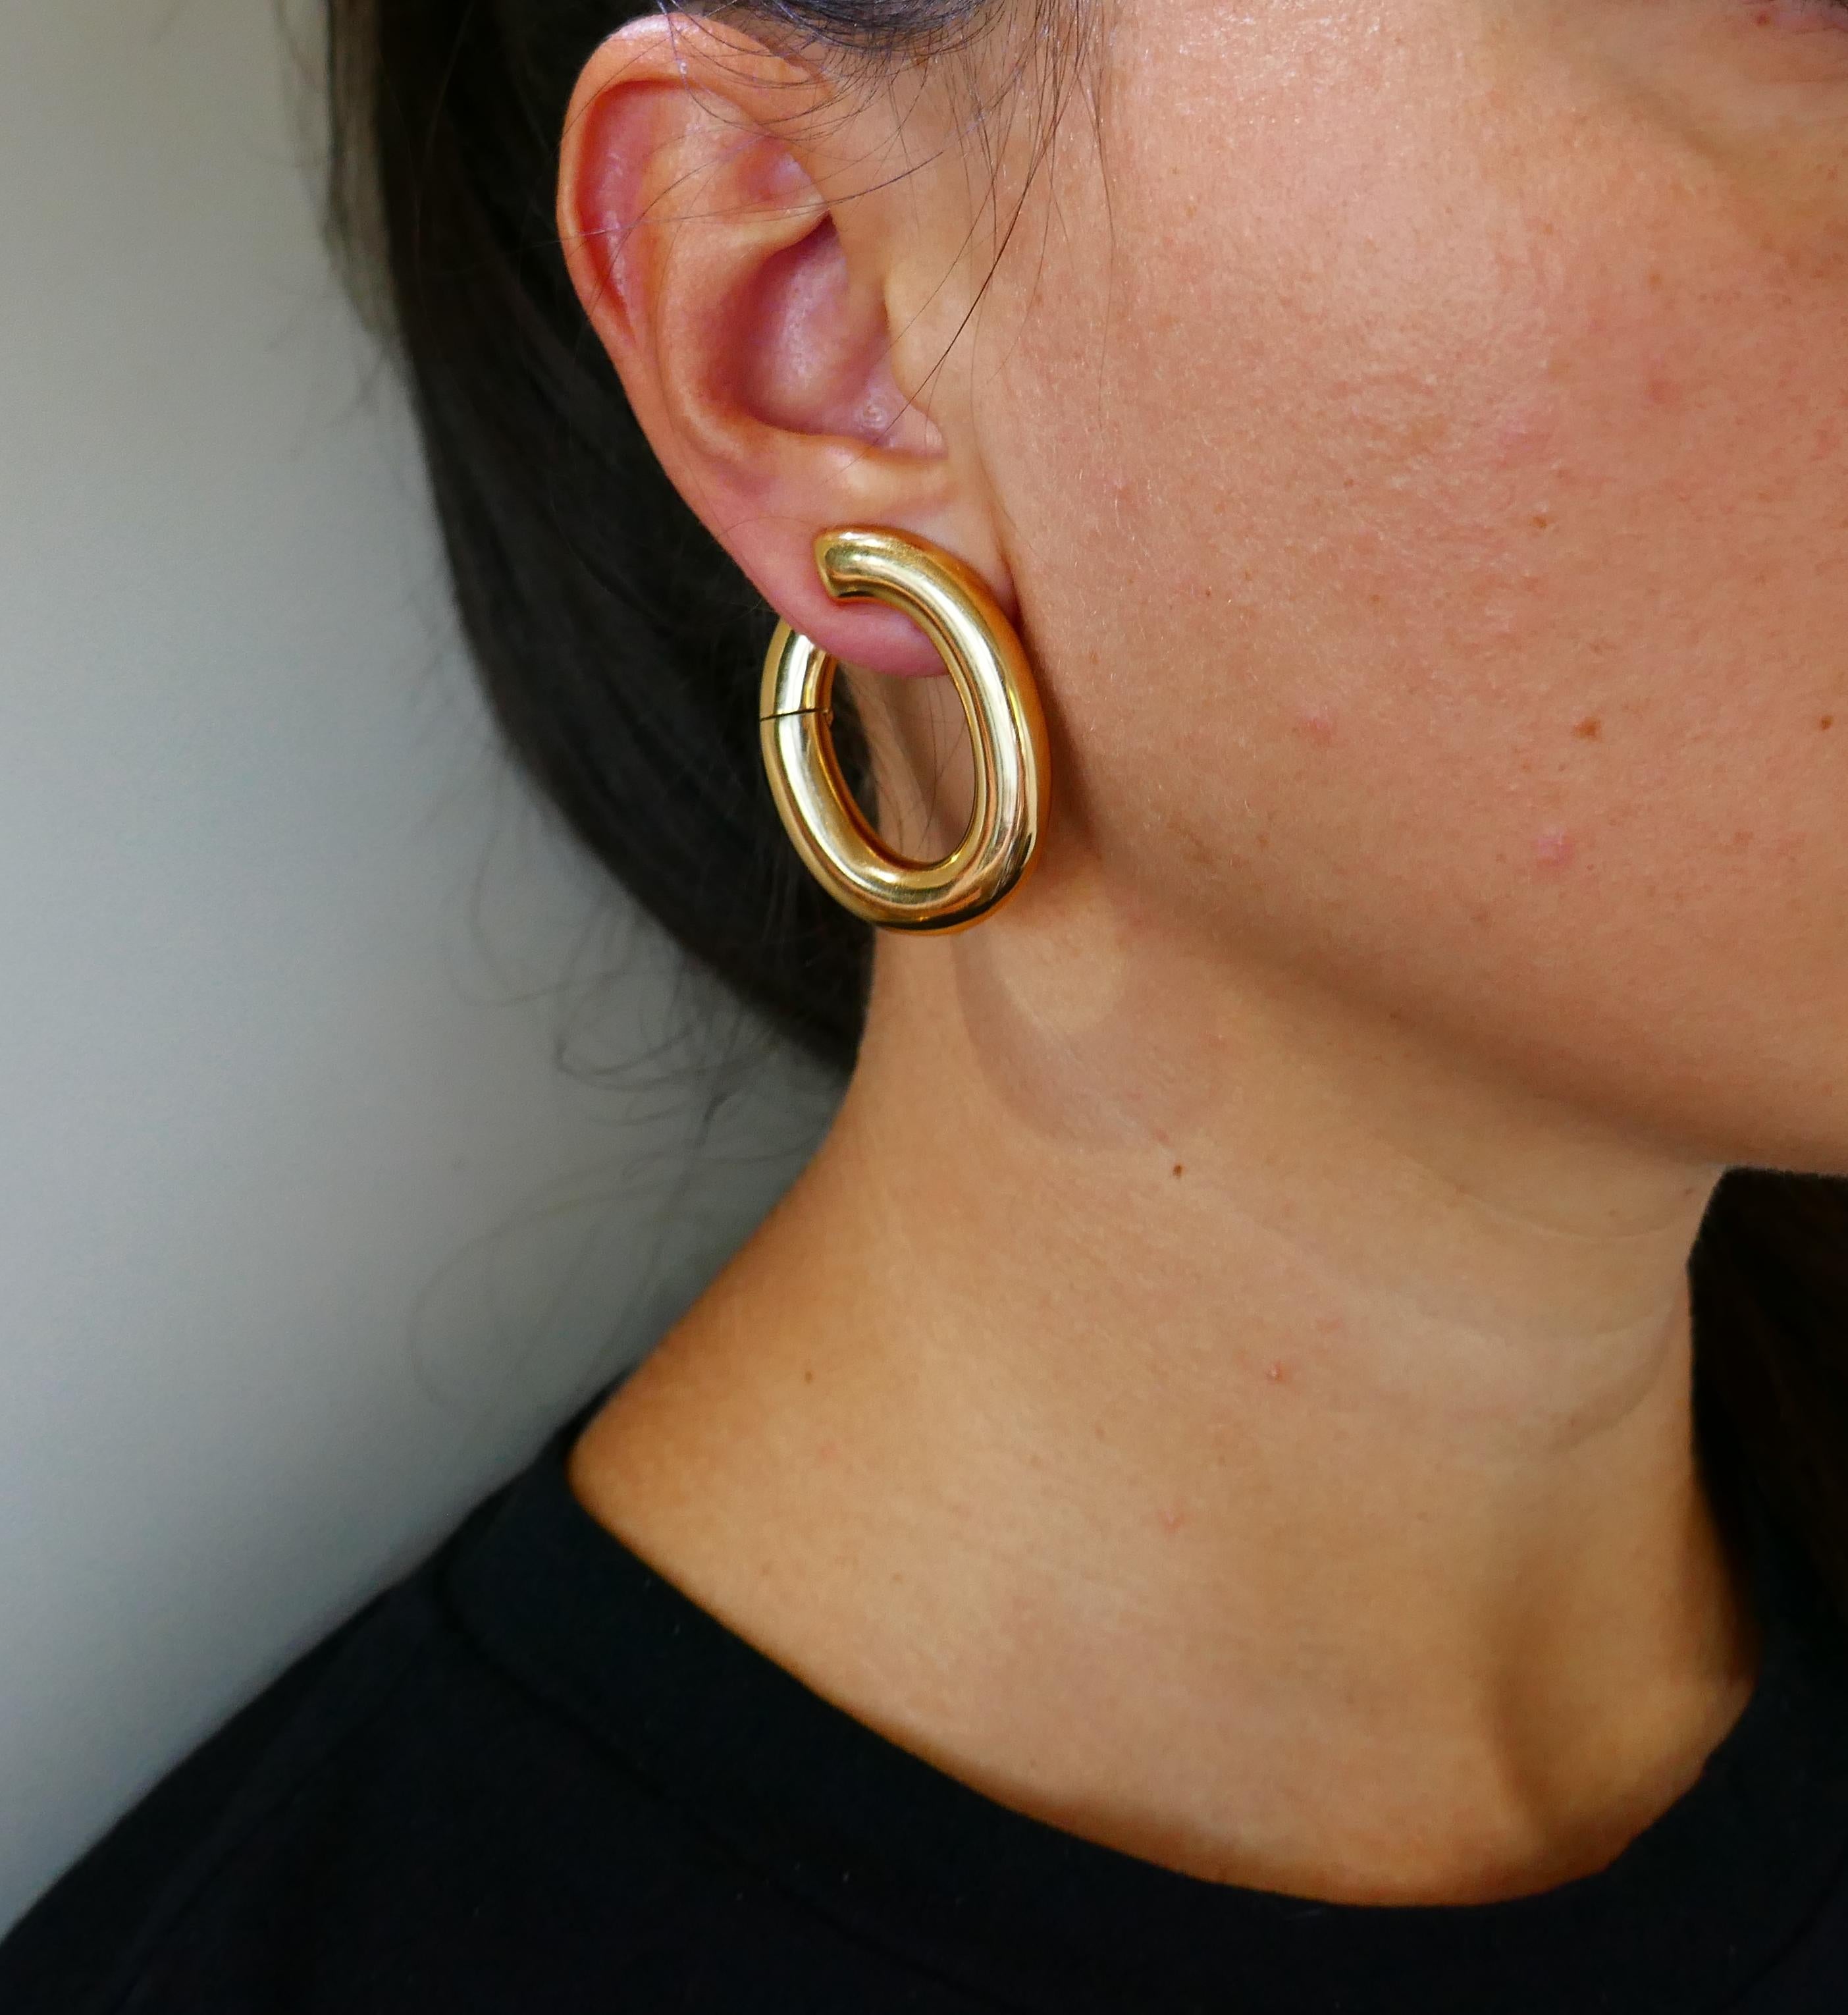 Chic and wearable earrings that are a 